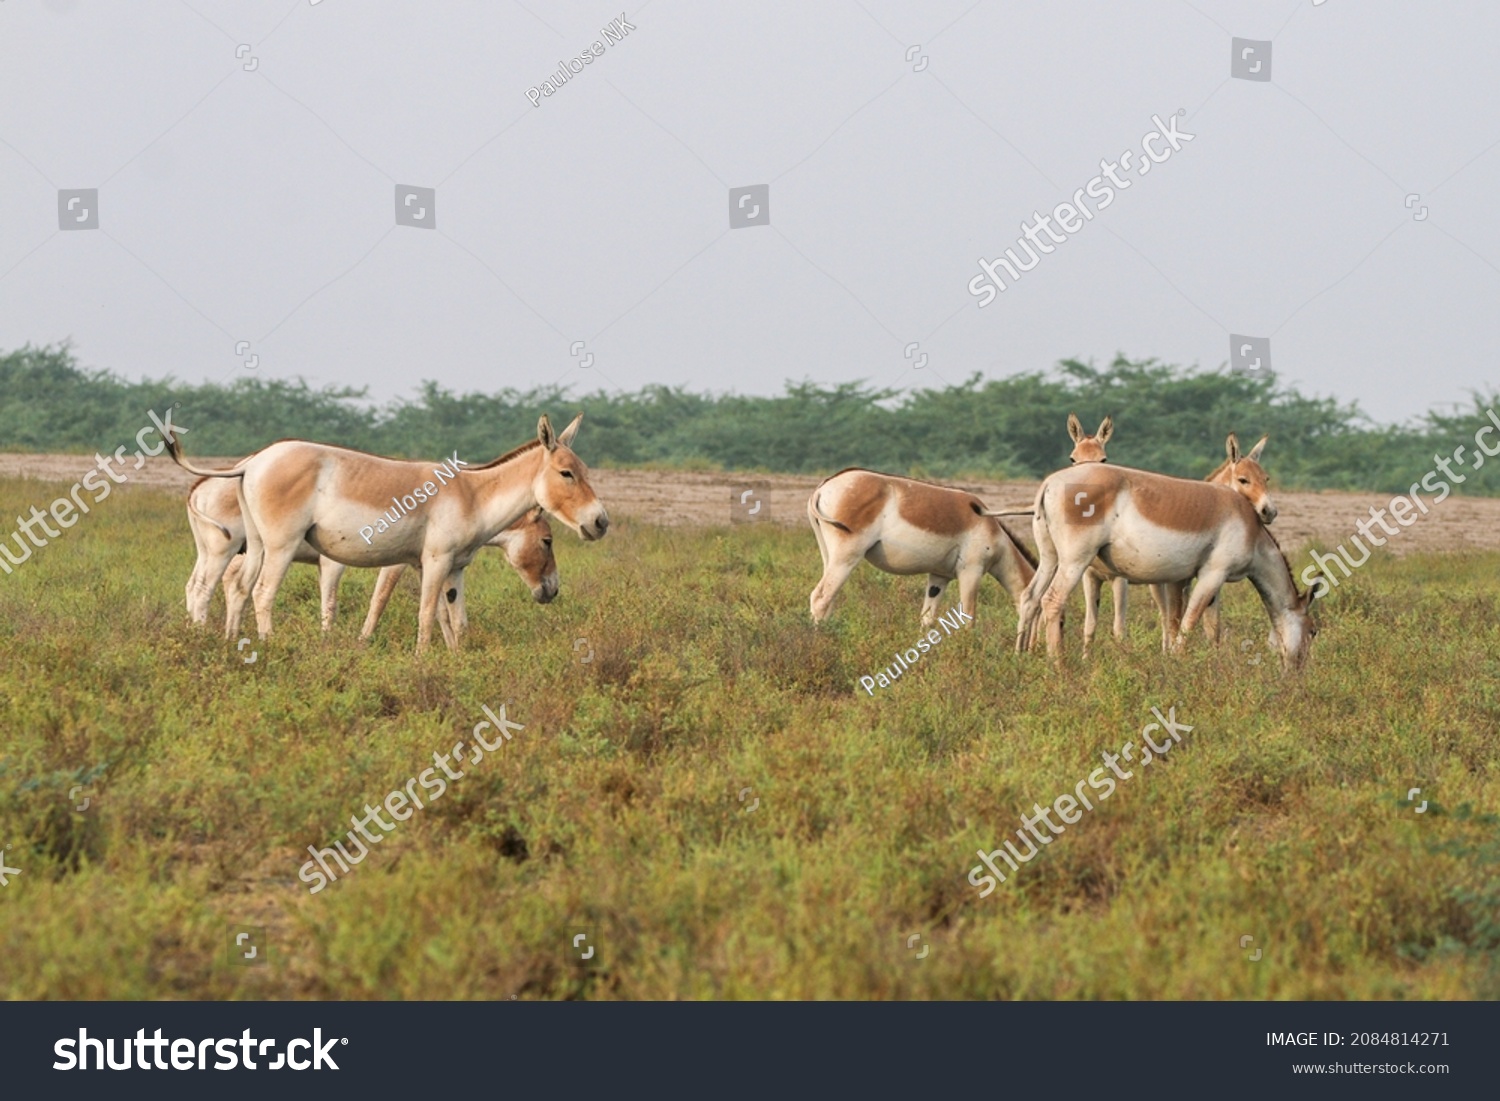 View of a small herd of Indian Wild Ass at Little Rann of Kutch, Gujarat, India #2084814271